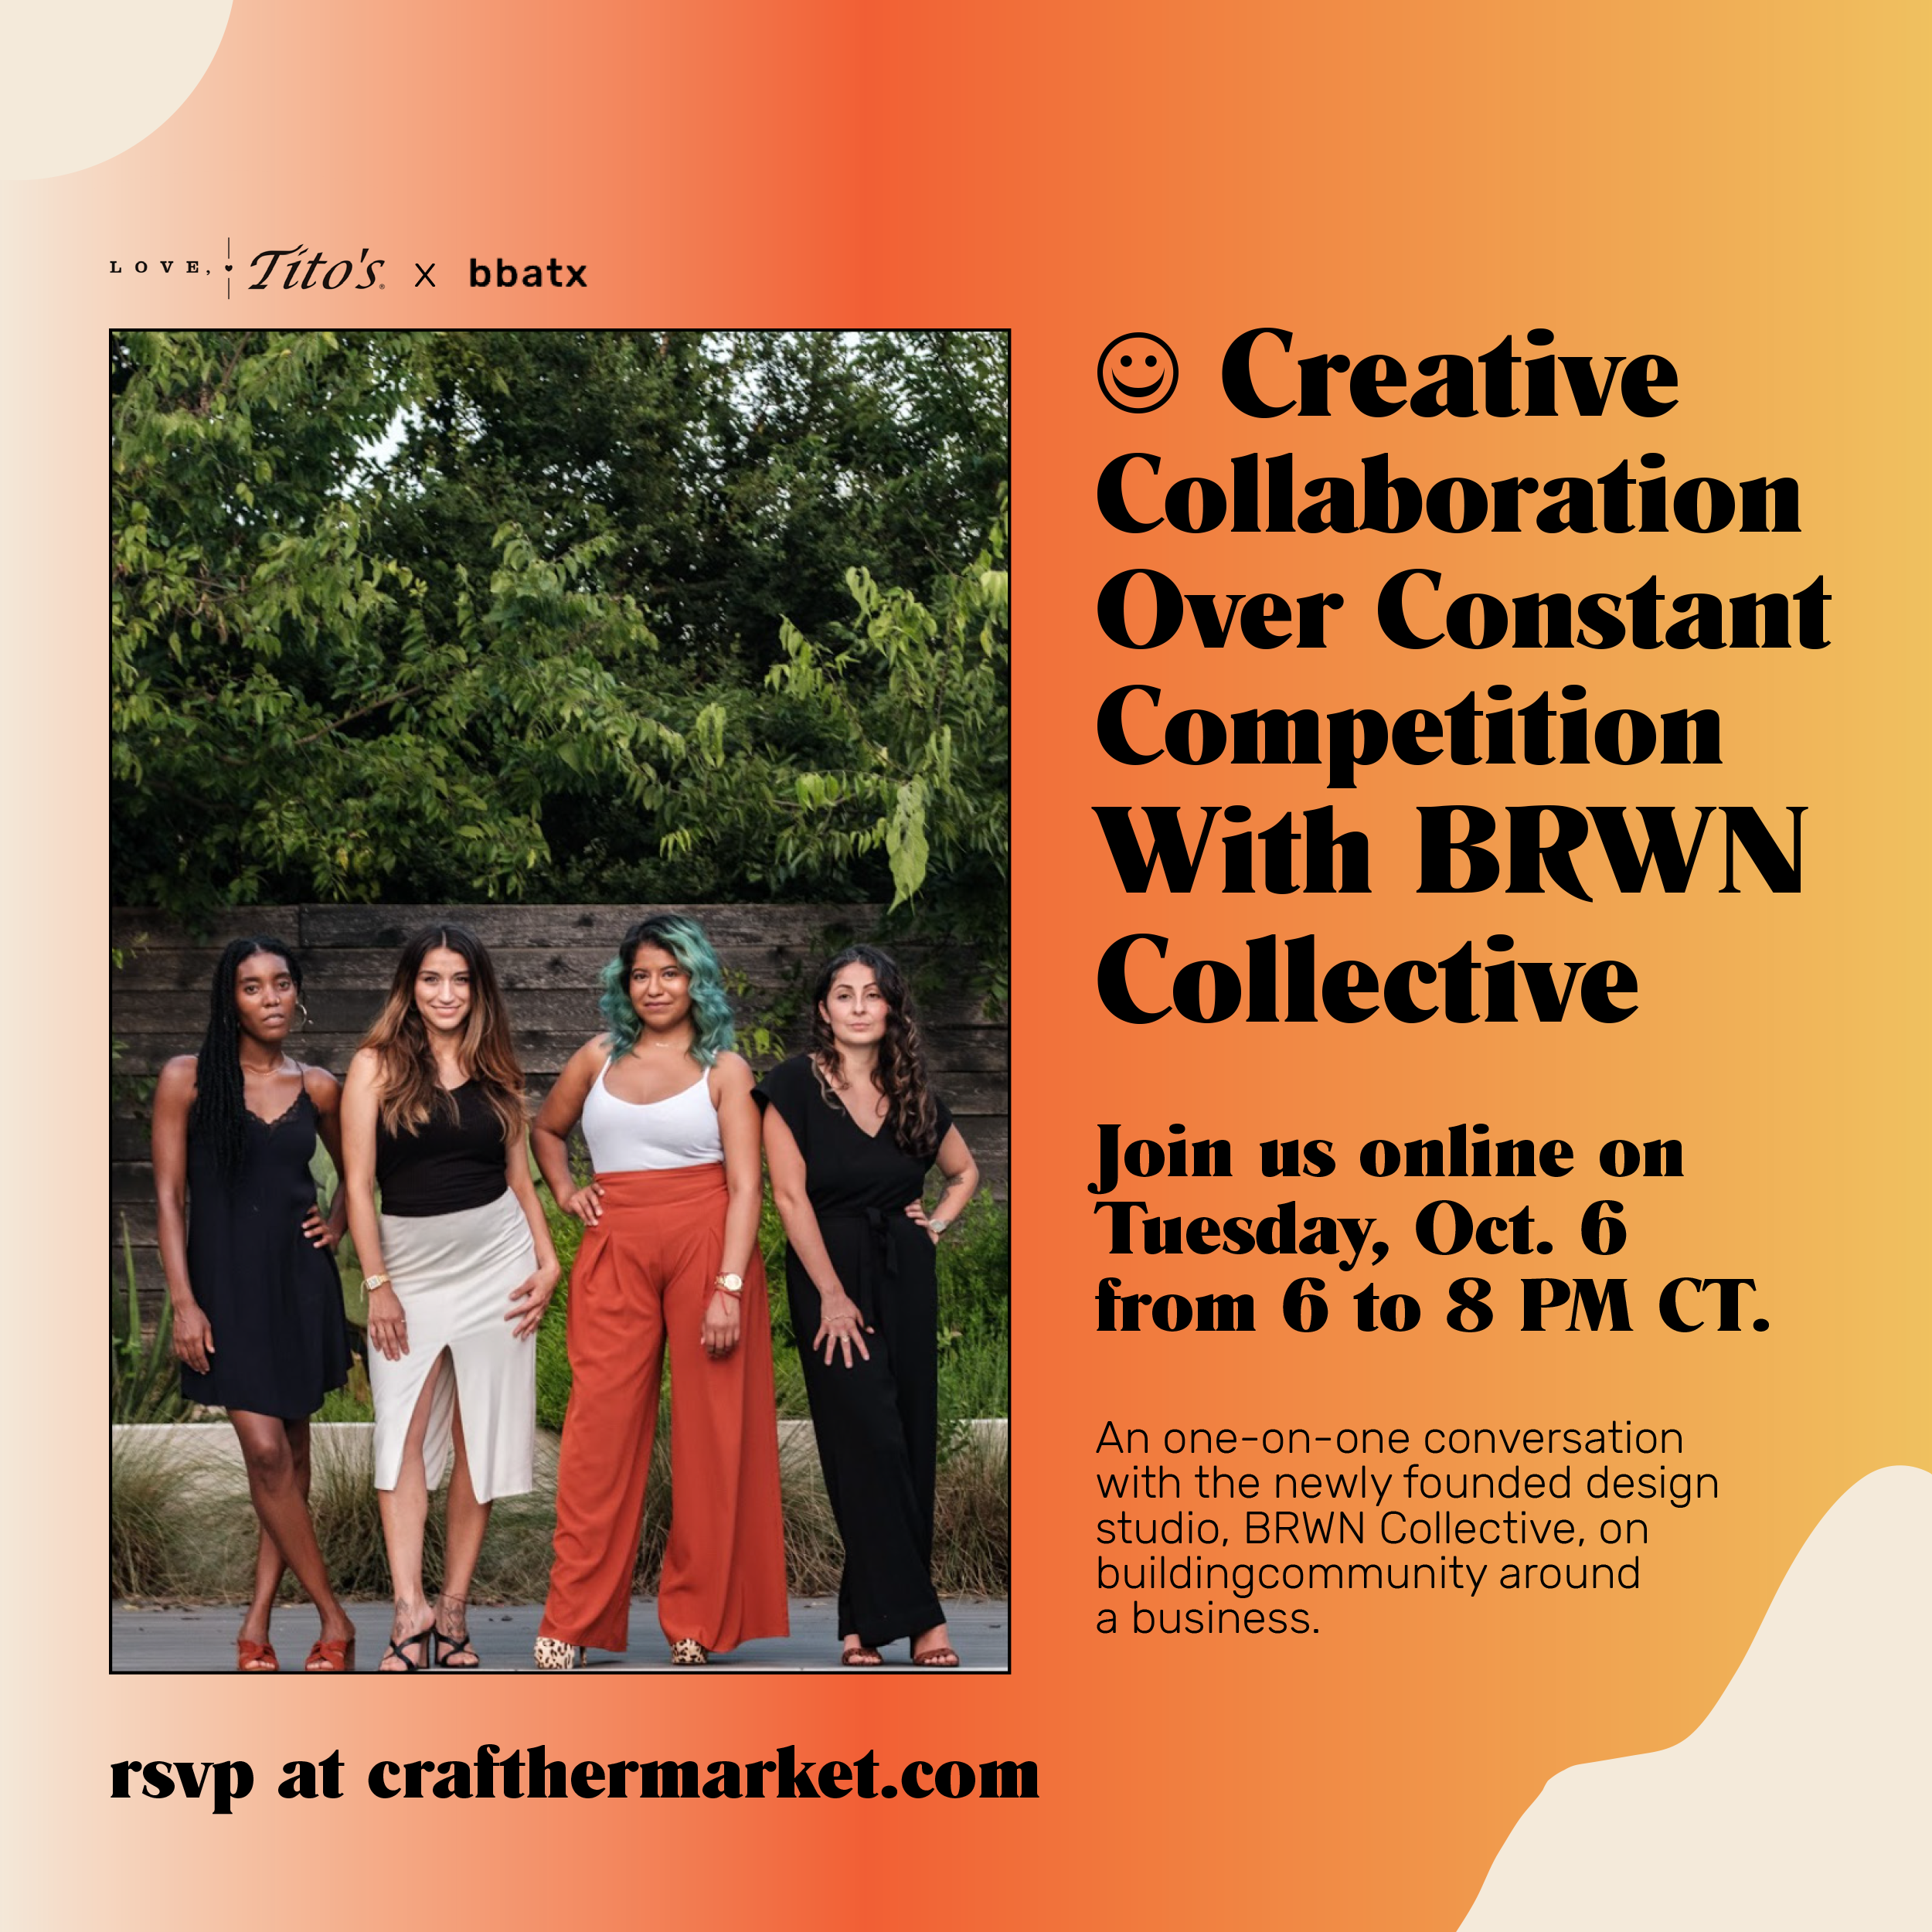 Creative Collaboration Over Constant Competition with BRWN Collective